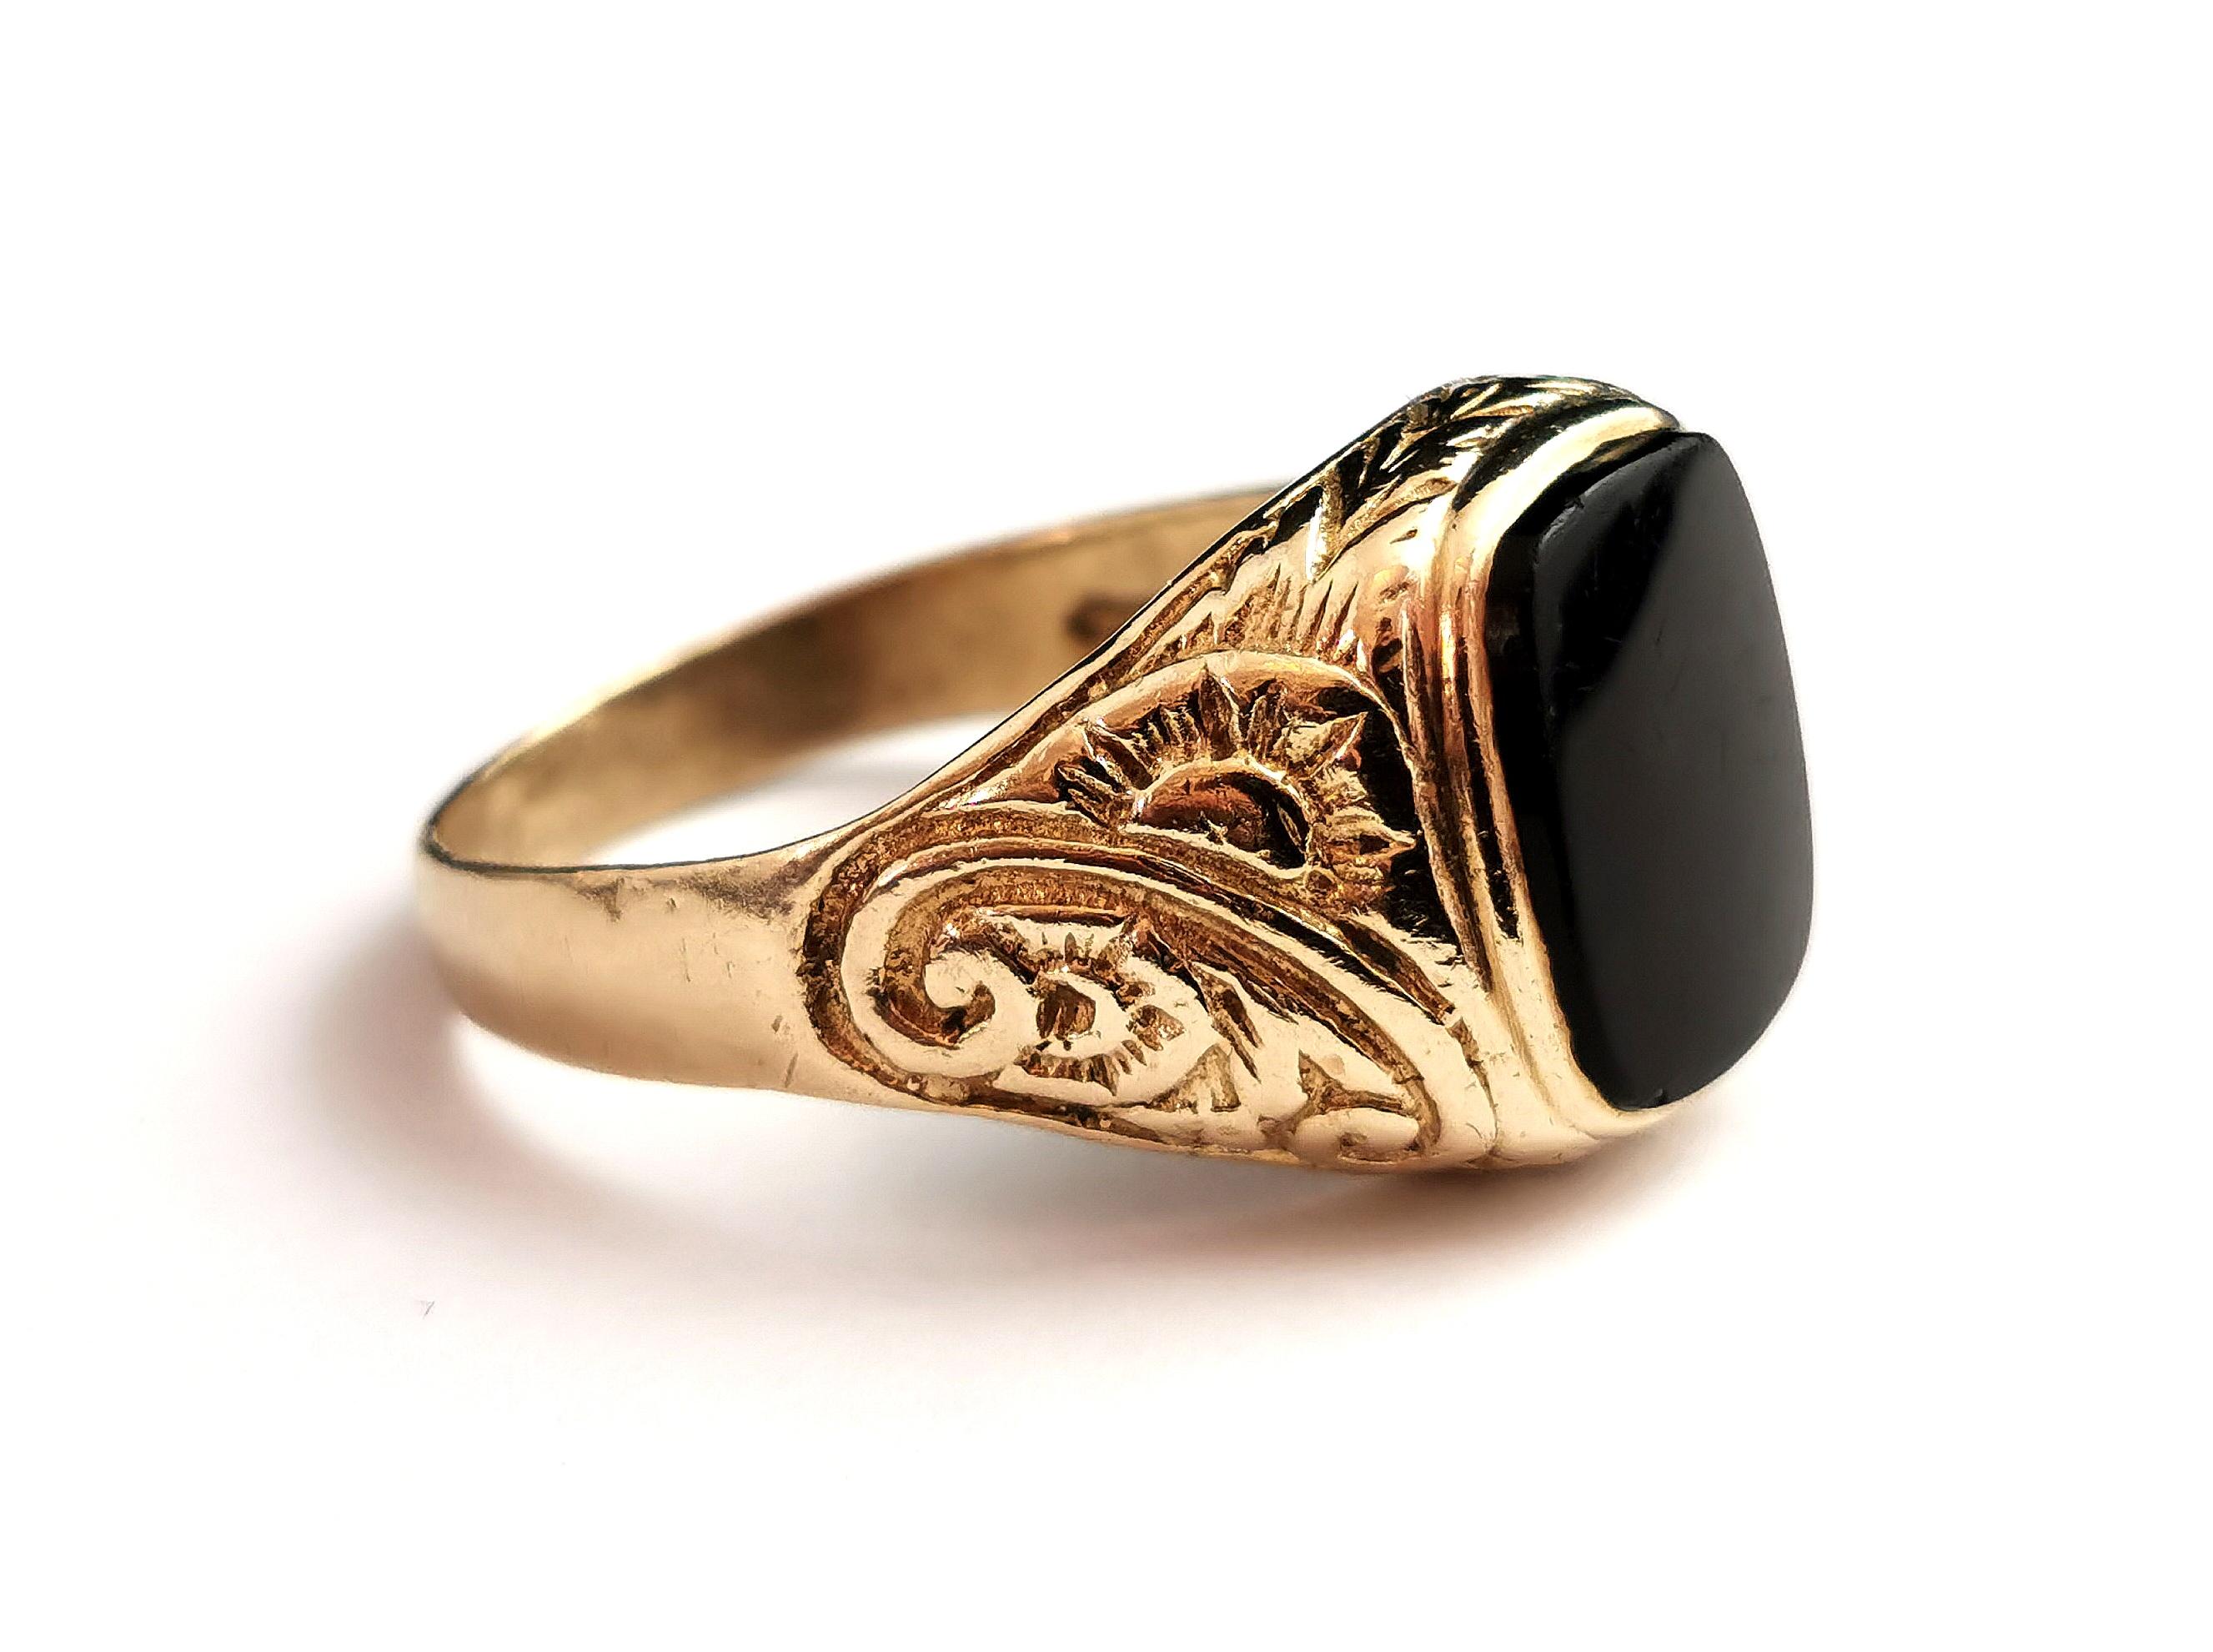 Vintage Onyx signet ring, 9k yellow gold, floral engraved  6